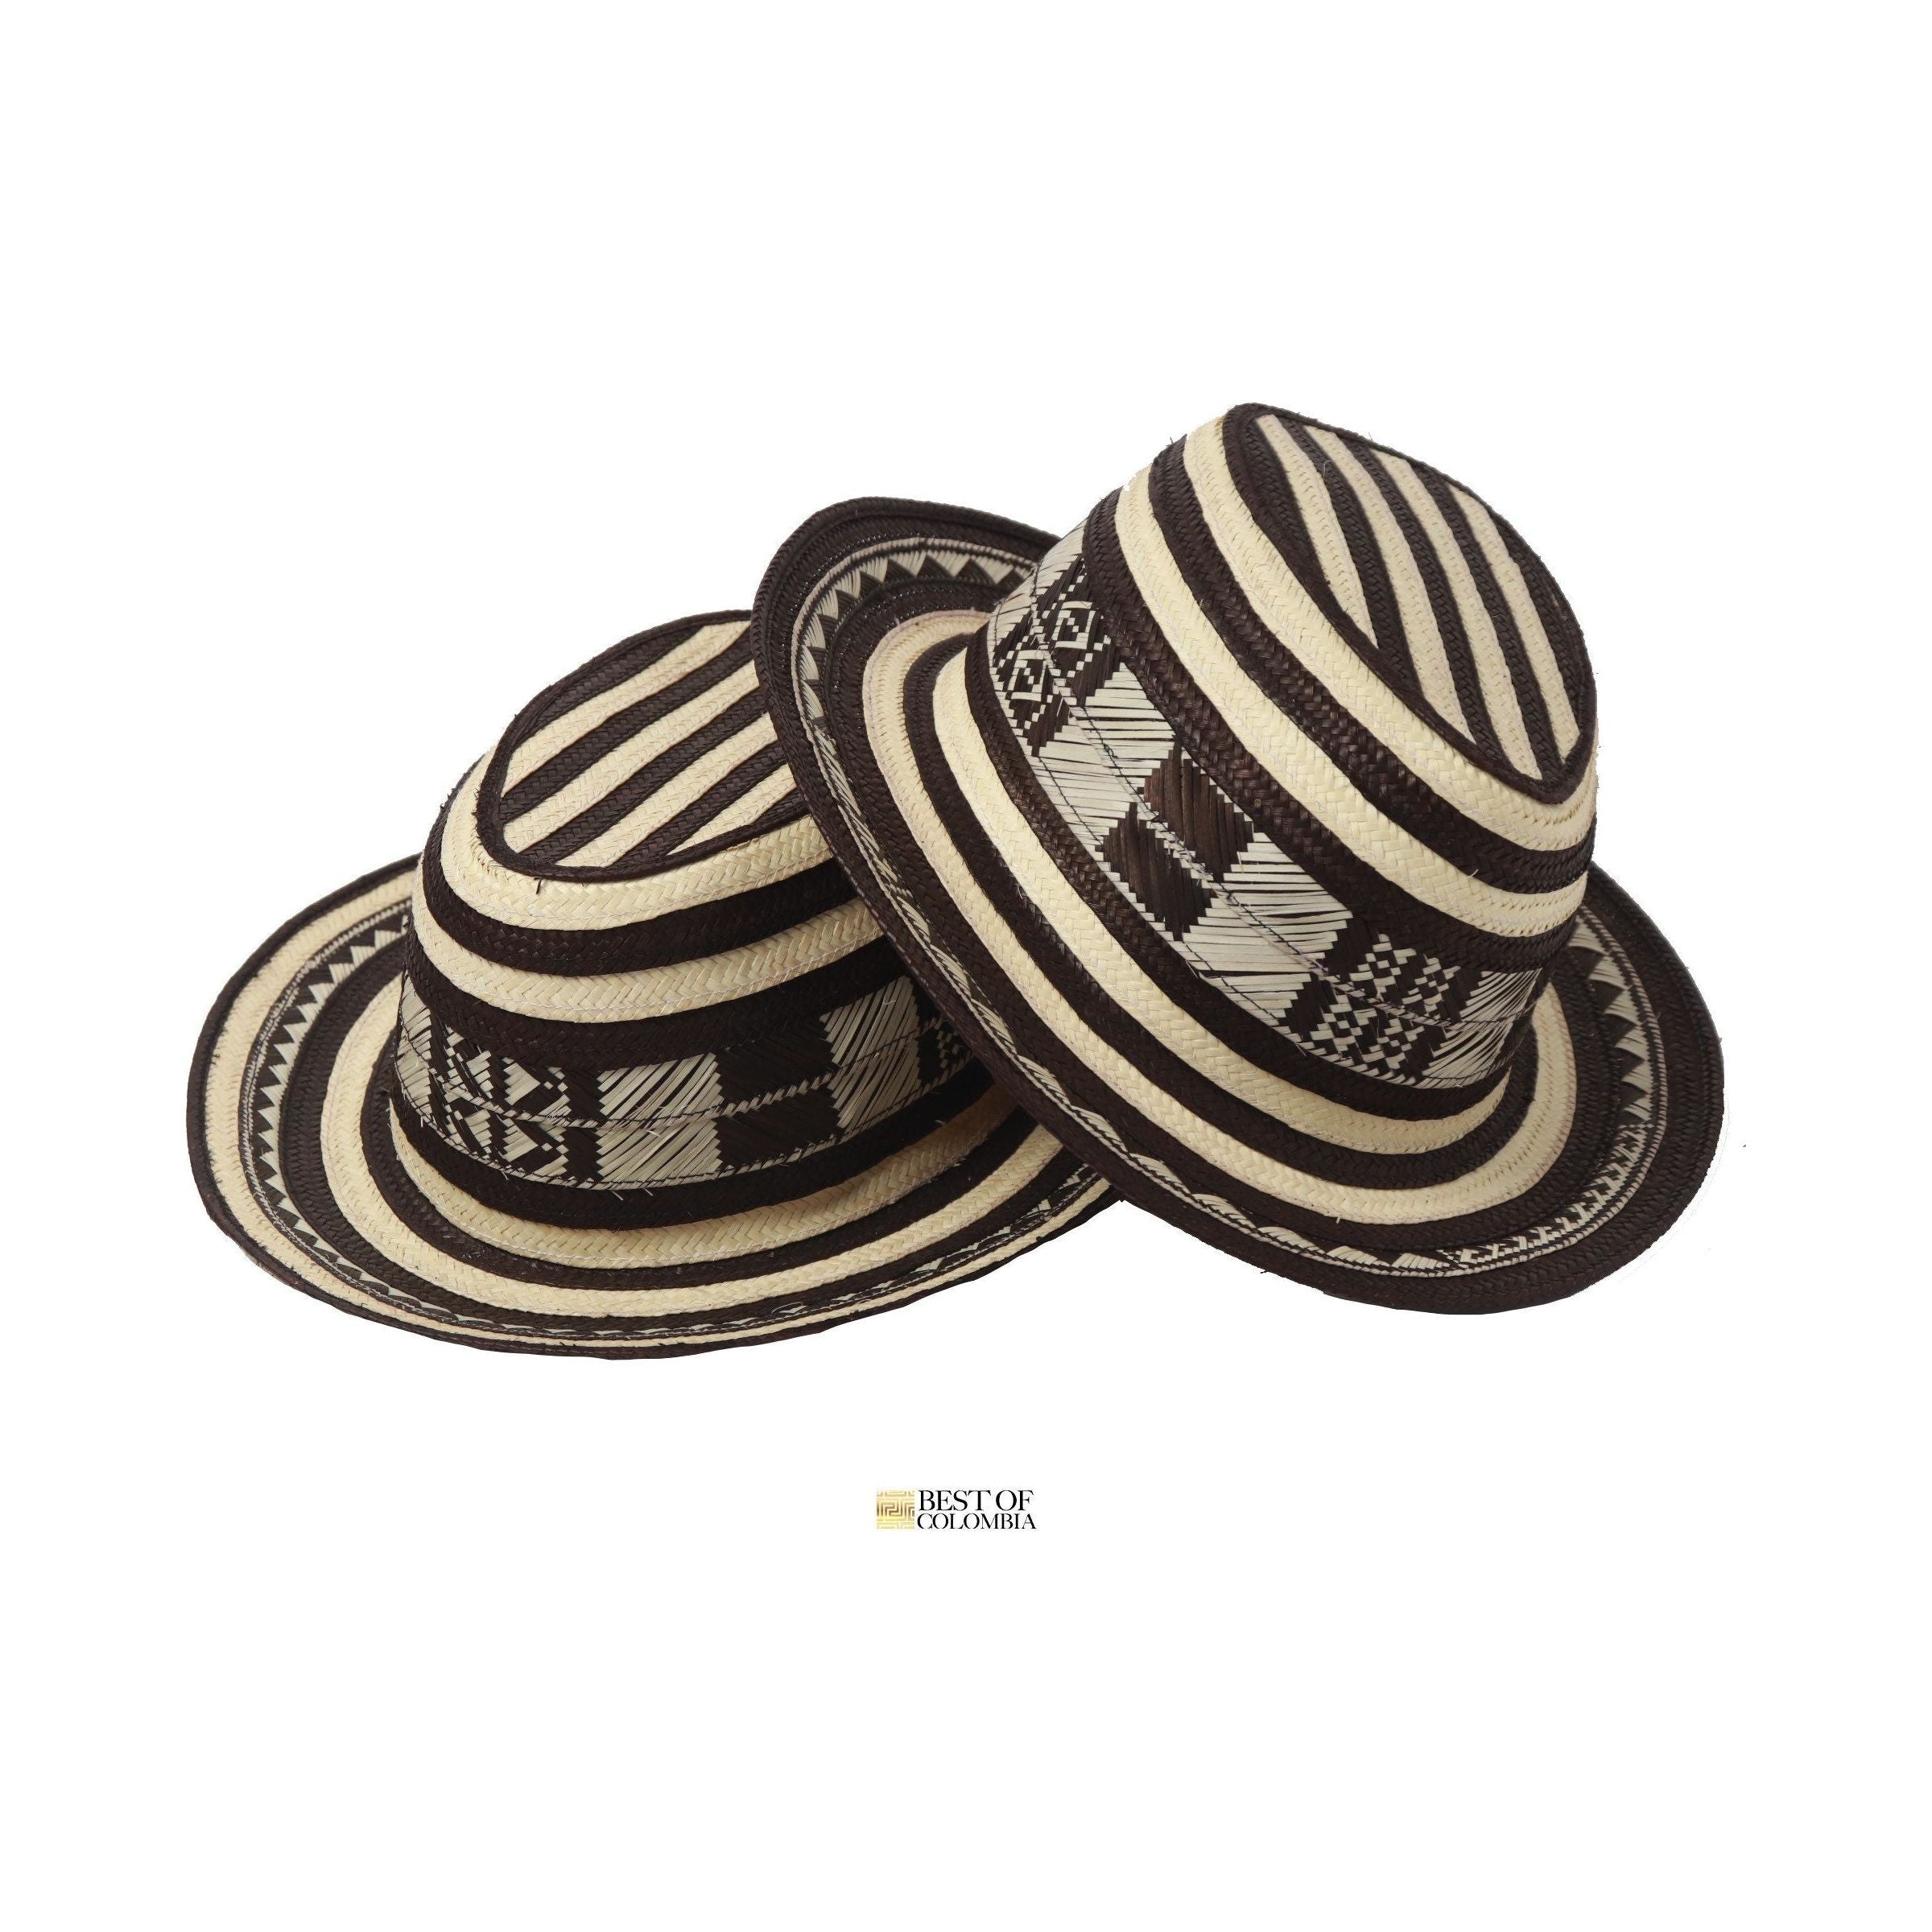 Vueltiao Panama Hat Style – Best of Colombia